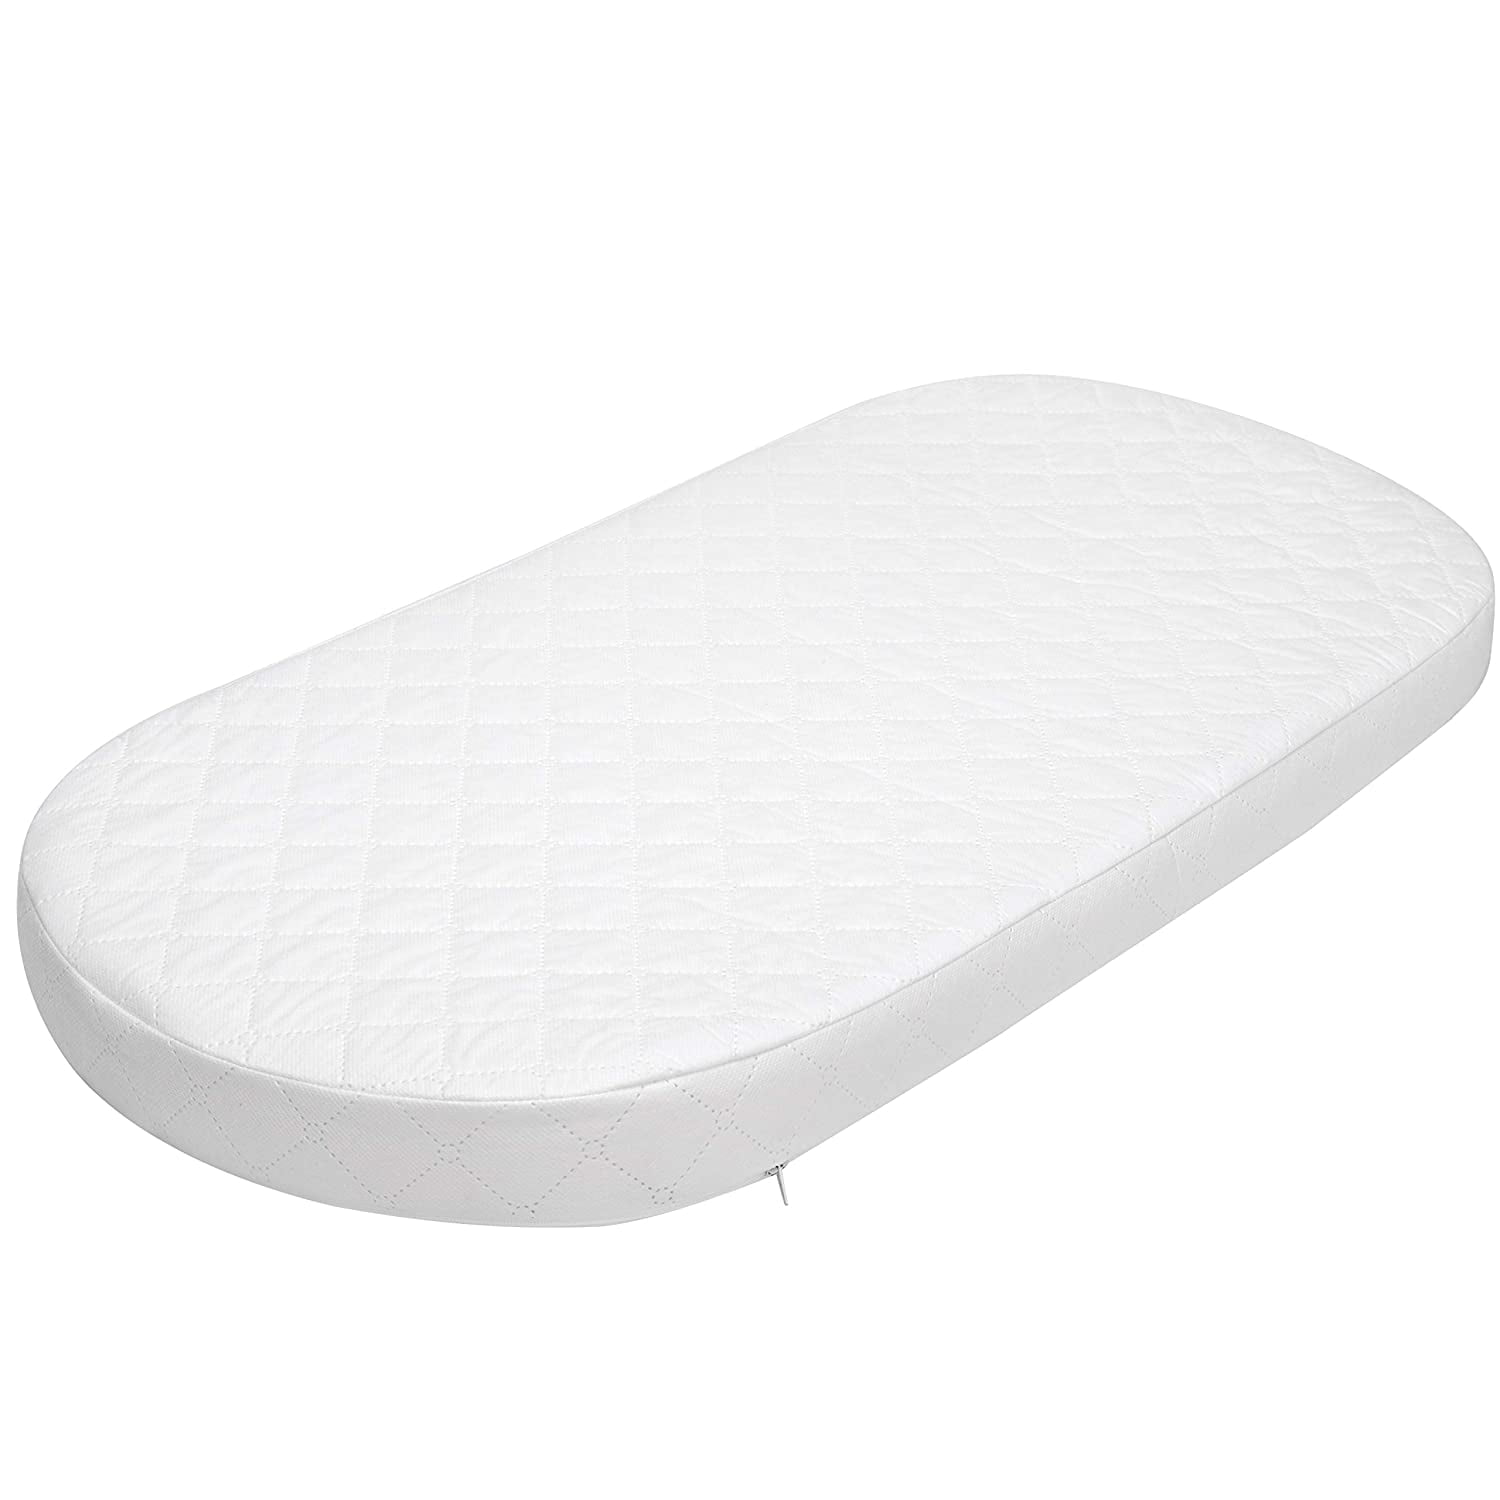 Moses Basket Foam Mattress Bassinet Baby PRAM Oval Fully Breathable Quilted 80 x 40 x 3.5 cm 